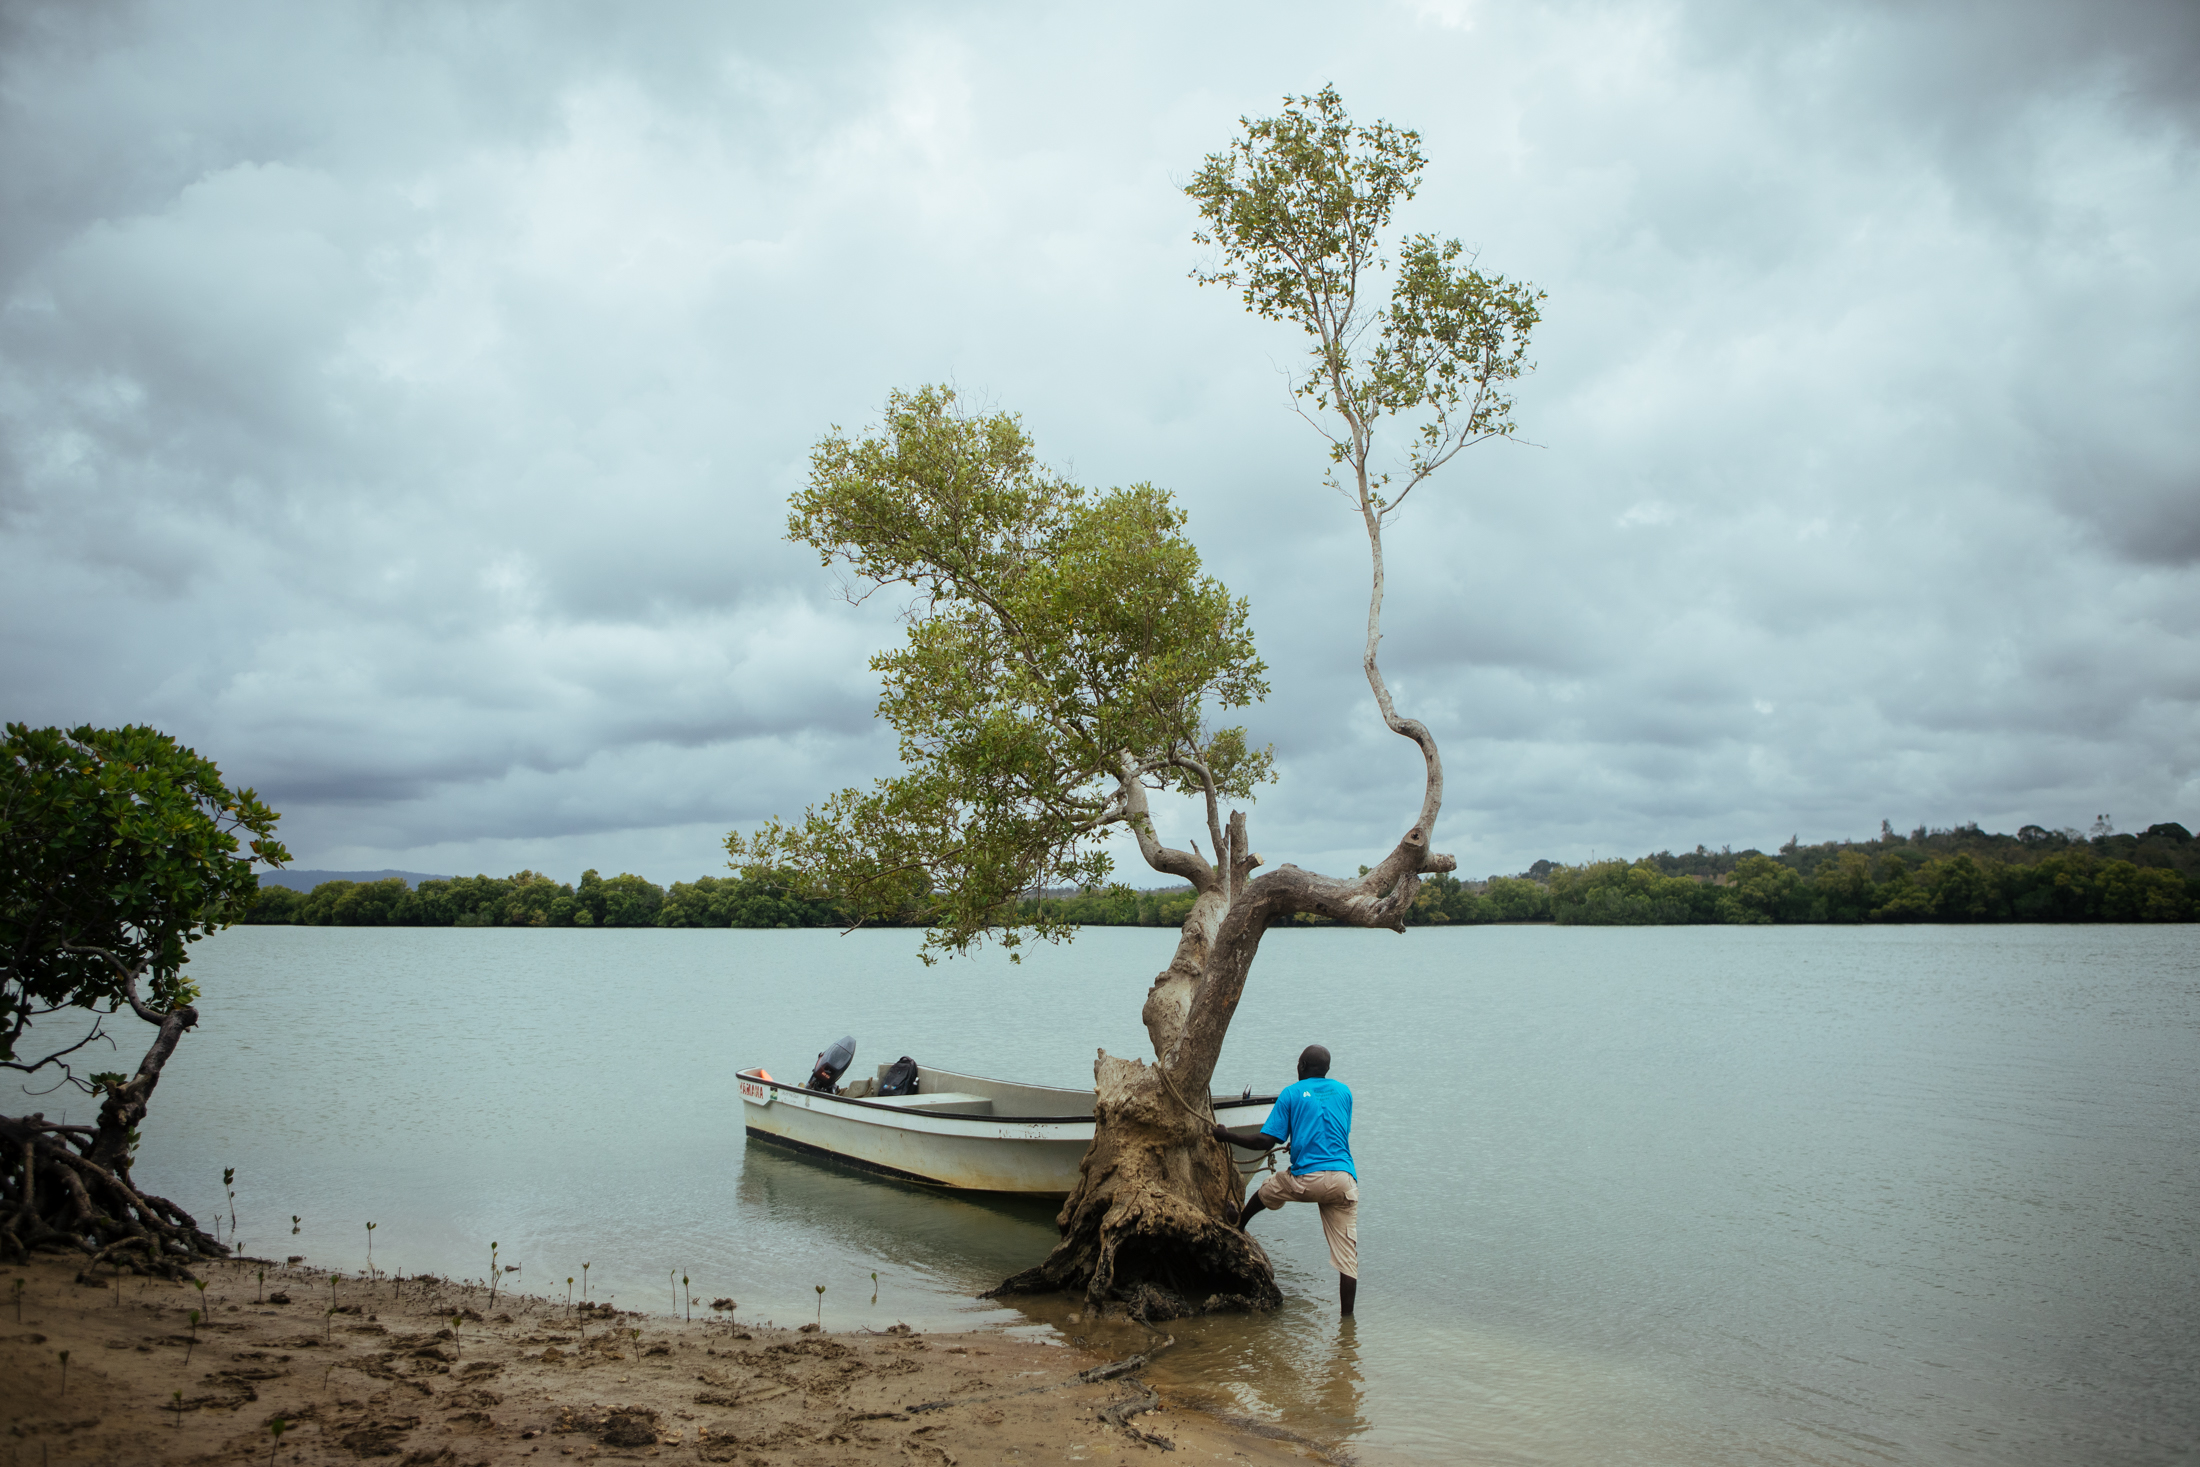 A man tying a boat to a tree